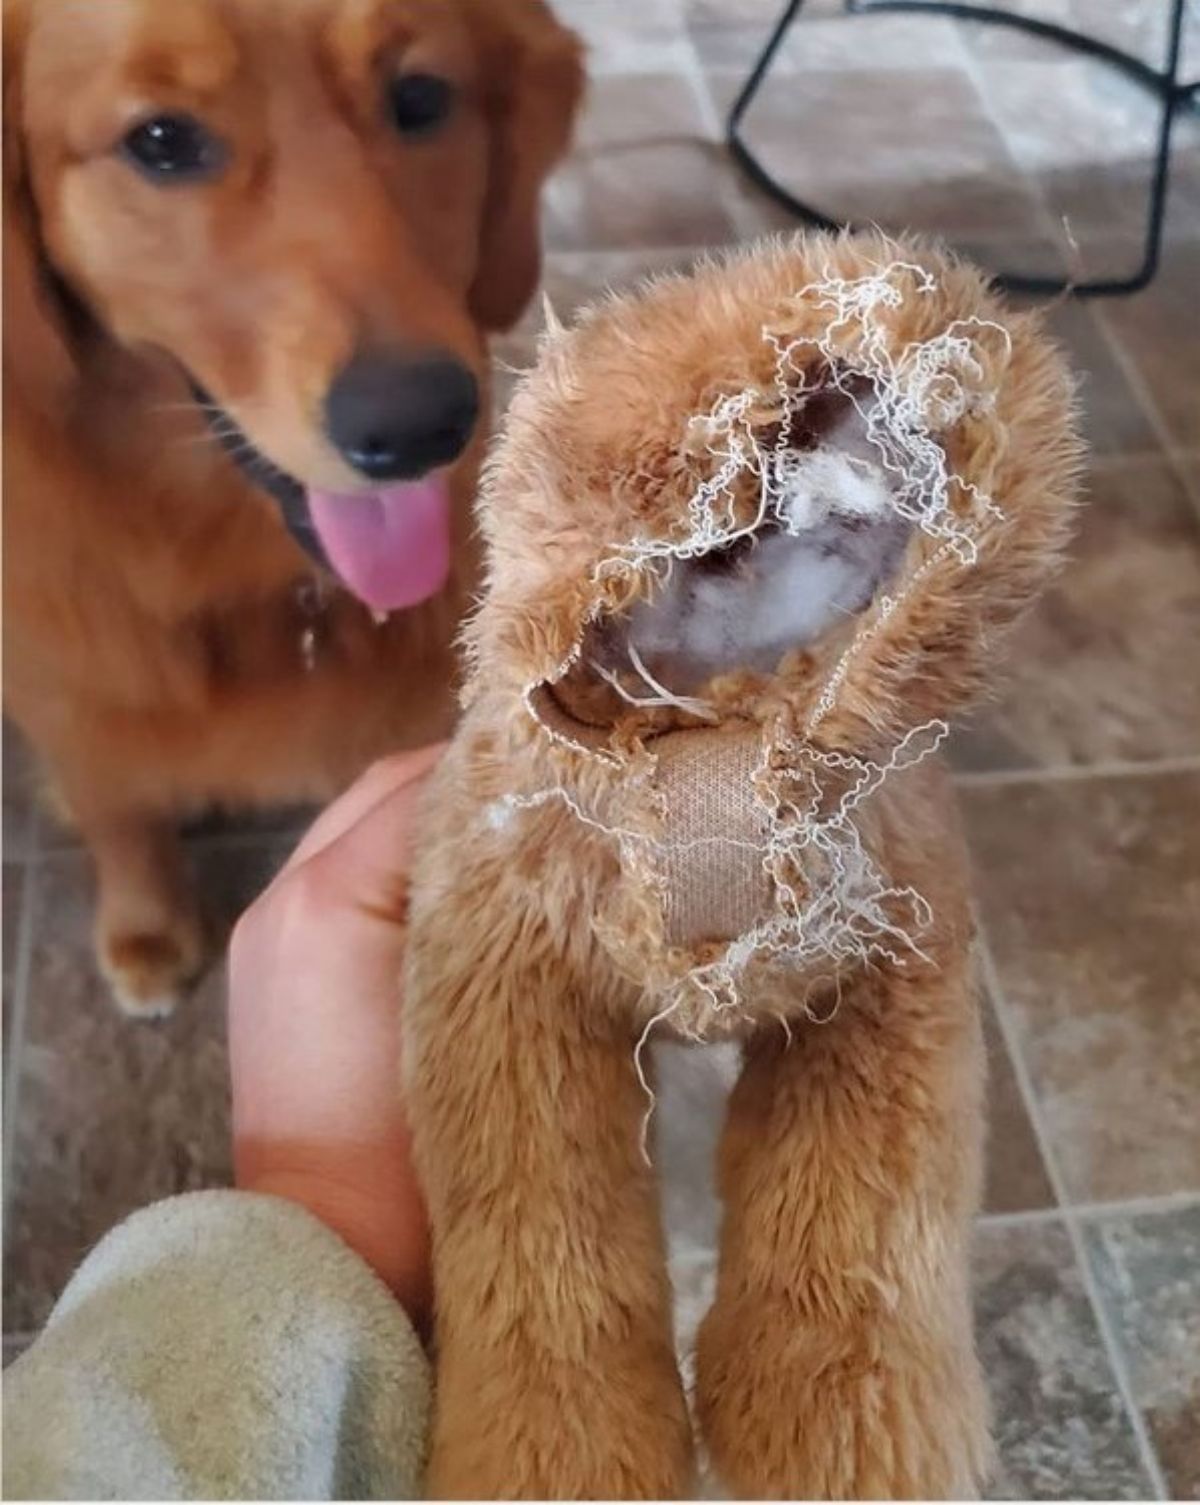 smiling golden retriever sitting with someone holding up a ripped up brown teddy bear